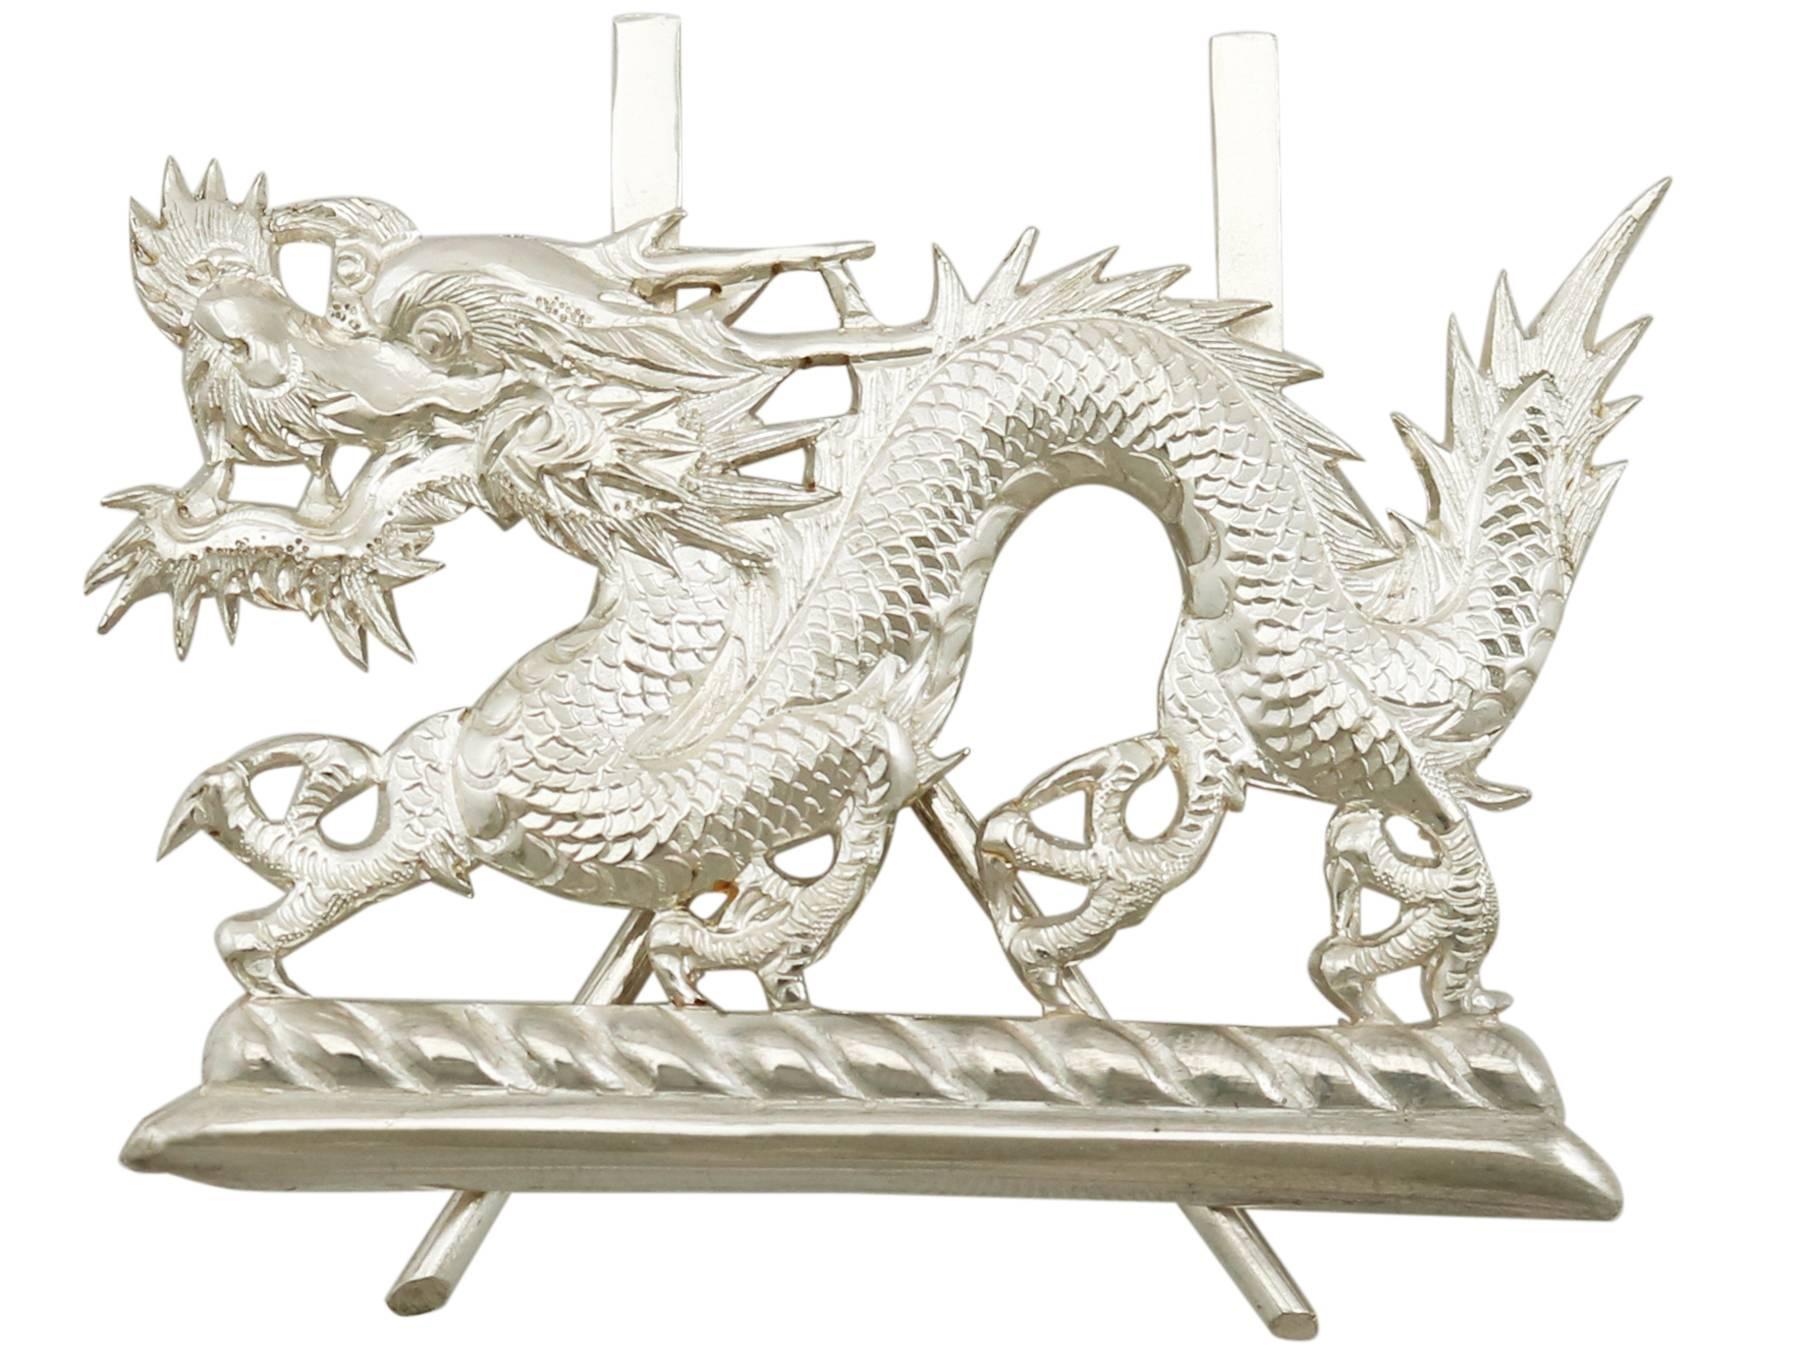 Late 19th Century Antique Chinese Export Silver 'Dragon' Card or Menu Holders, circa 1890